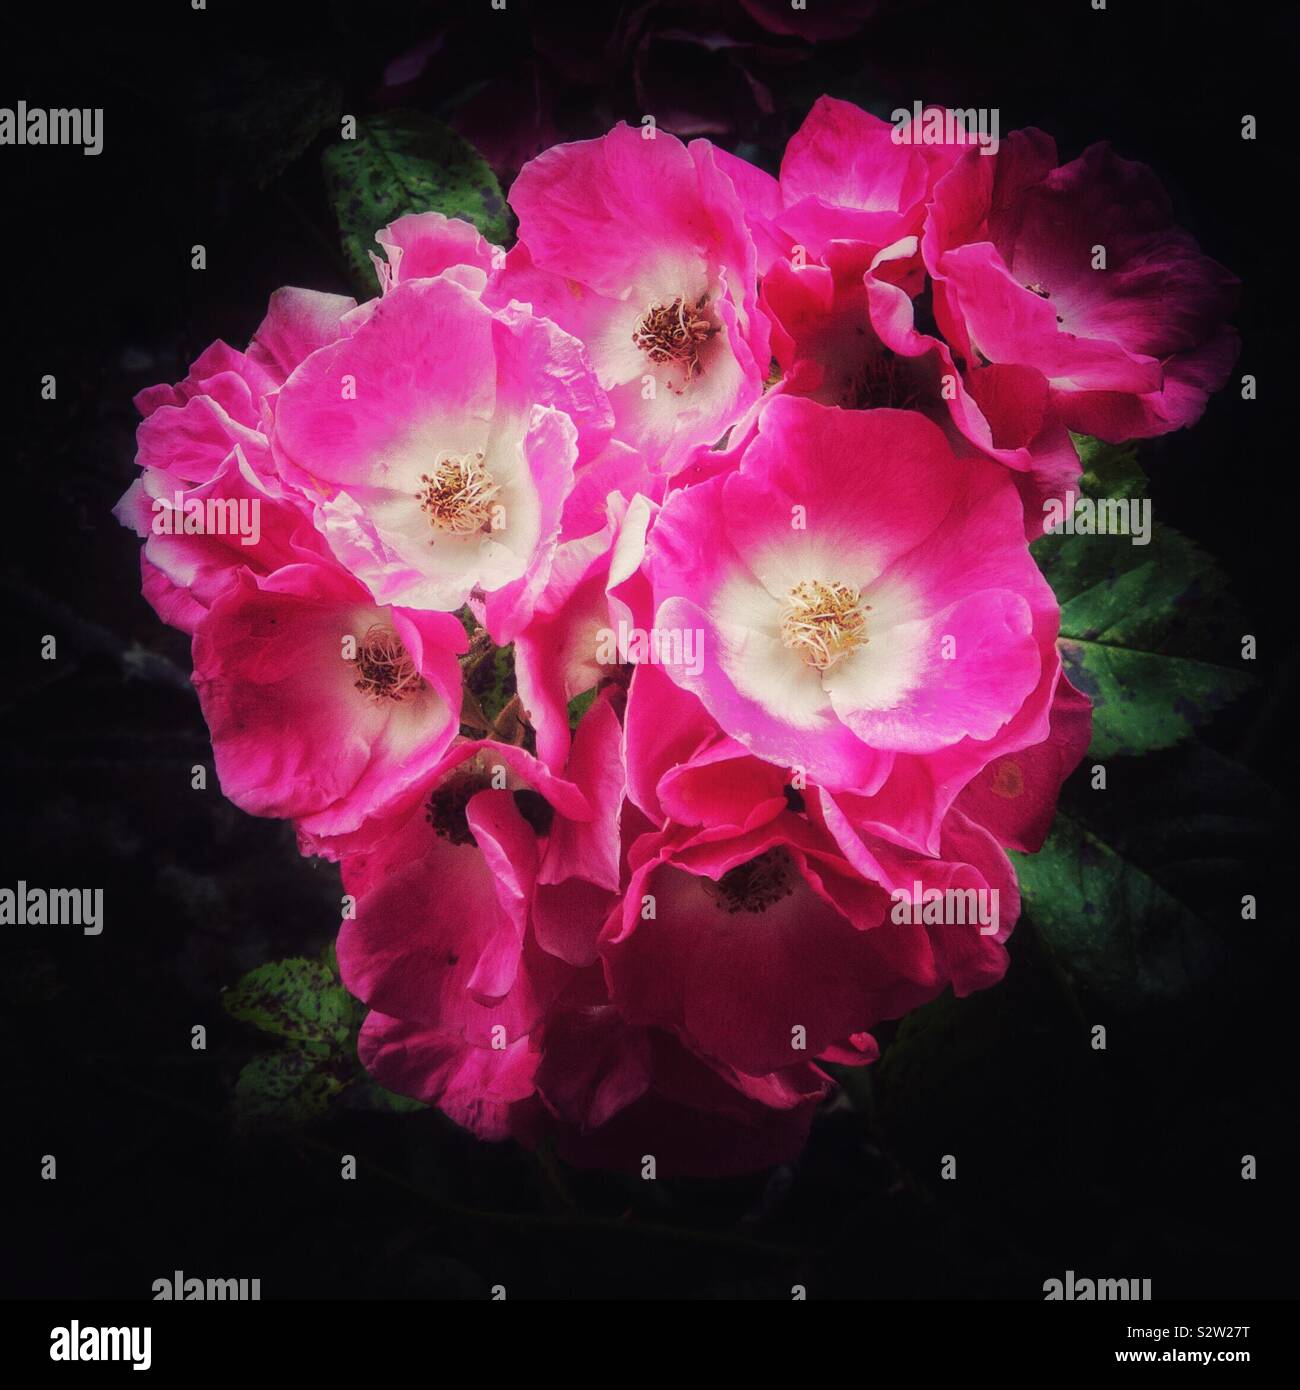 Single flowers of pink rambling roses close up. Stock Photo